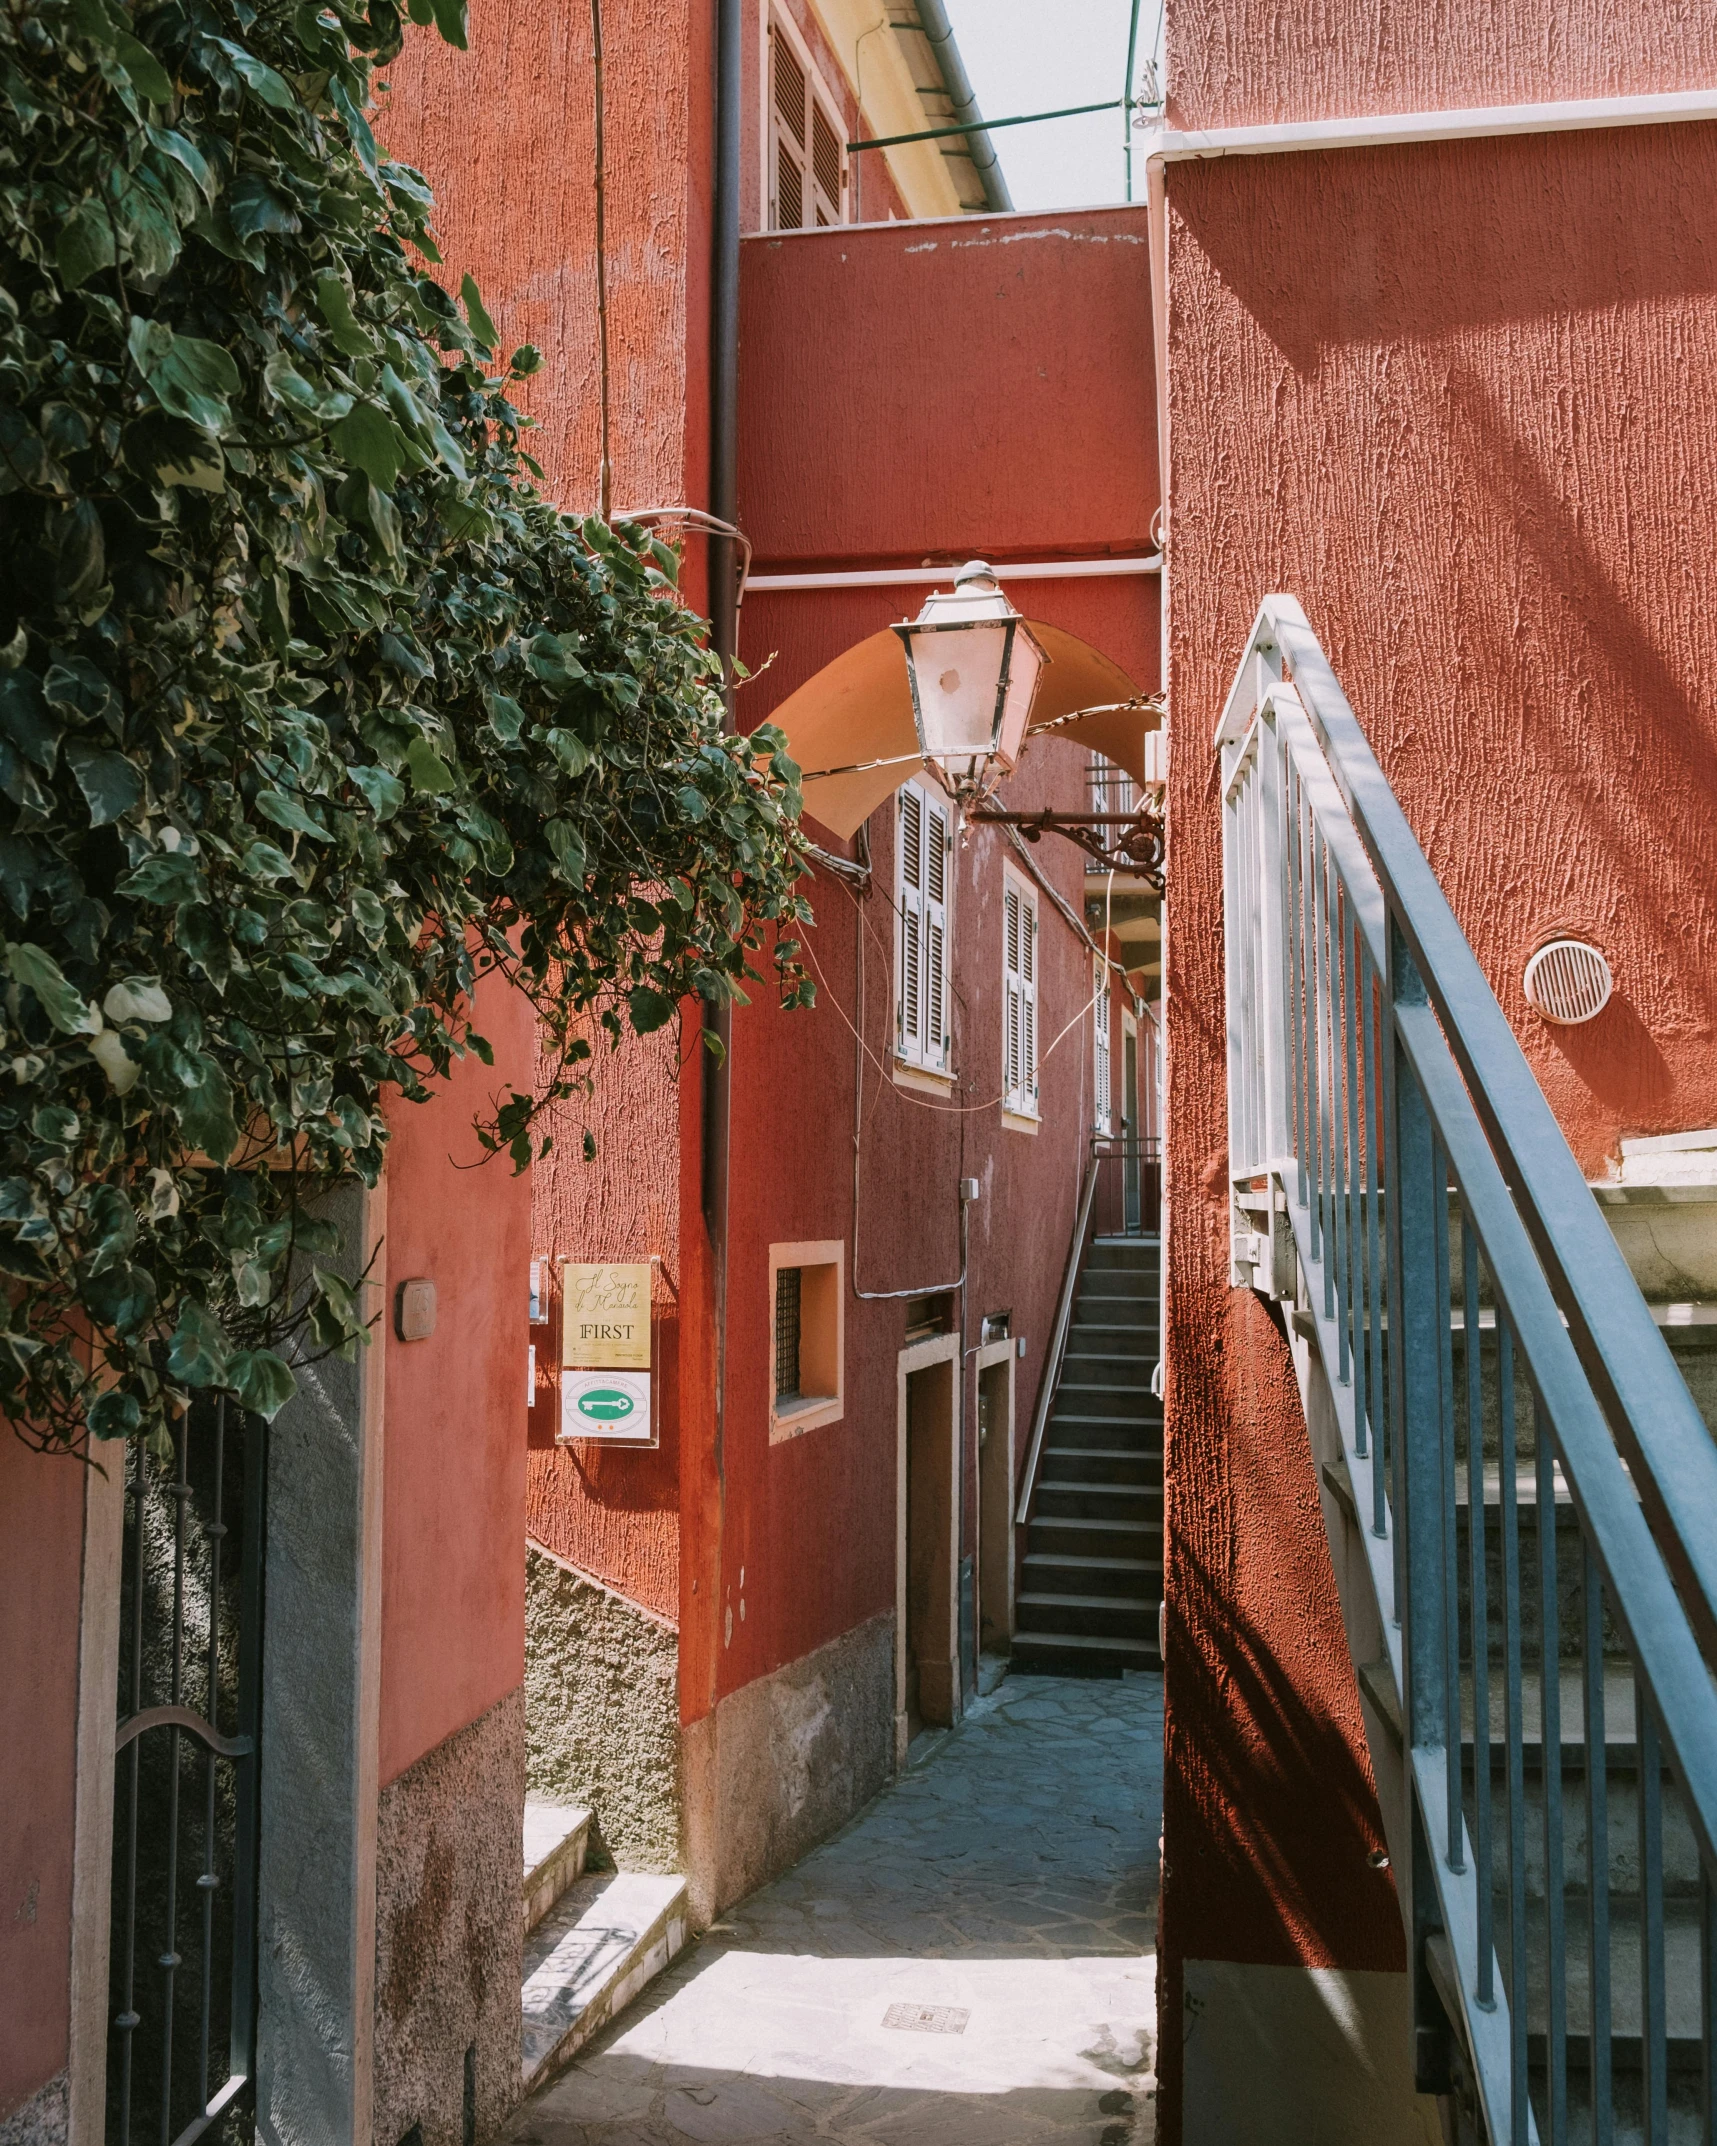 this alley way has a staircase and red wall